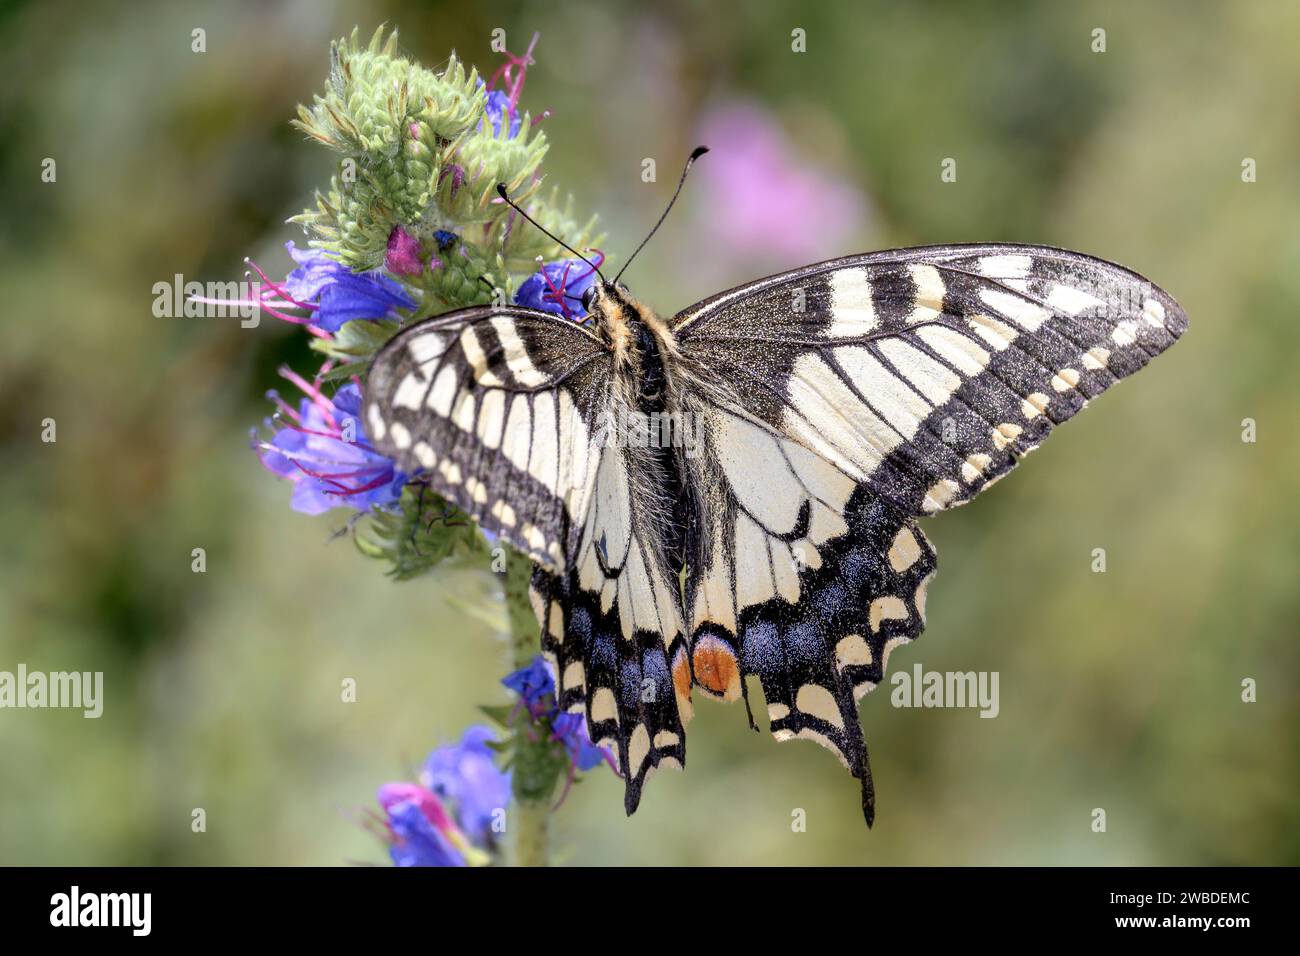 Common yellow swallowtail or old world swallowtail - Papilio machaon - resting on a blossom of viper's bugloss or blueweed - Echium vulgare Stock Photo